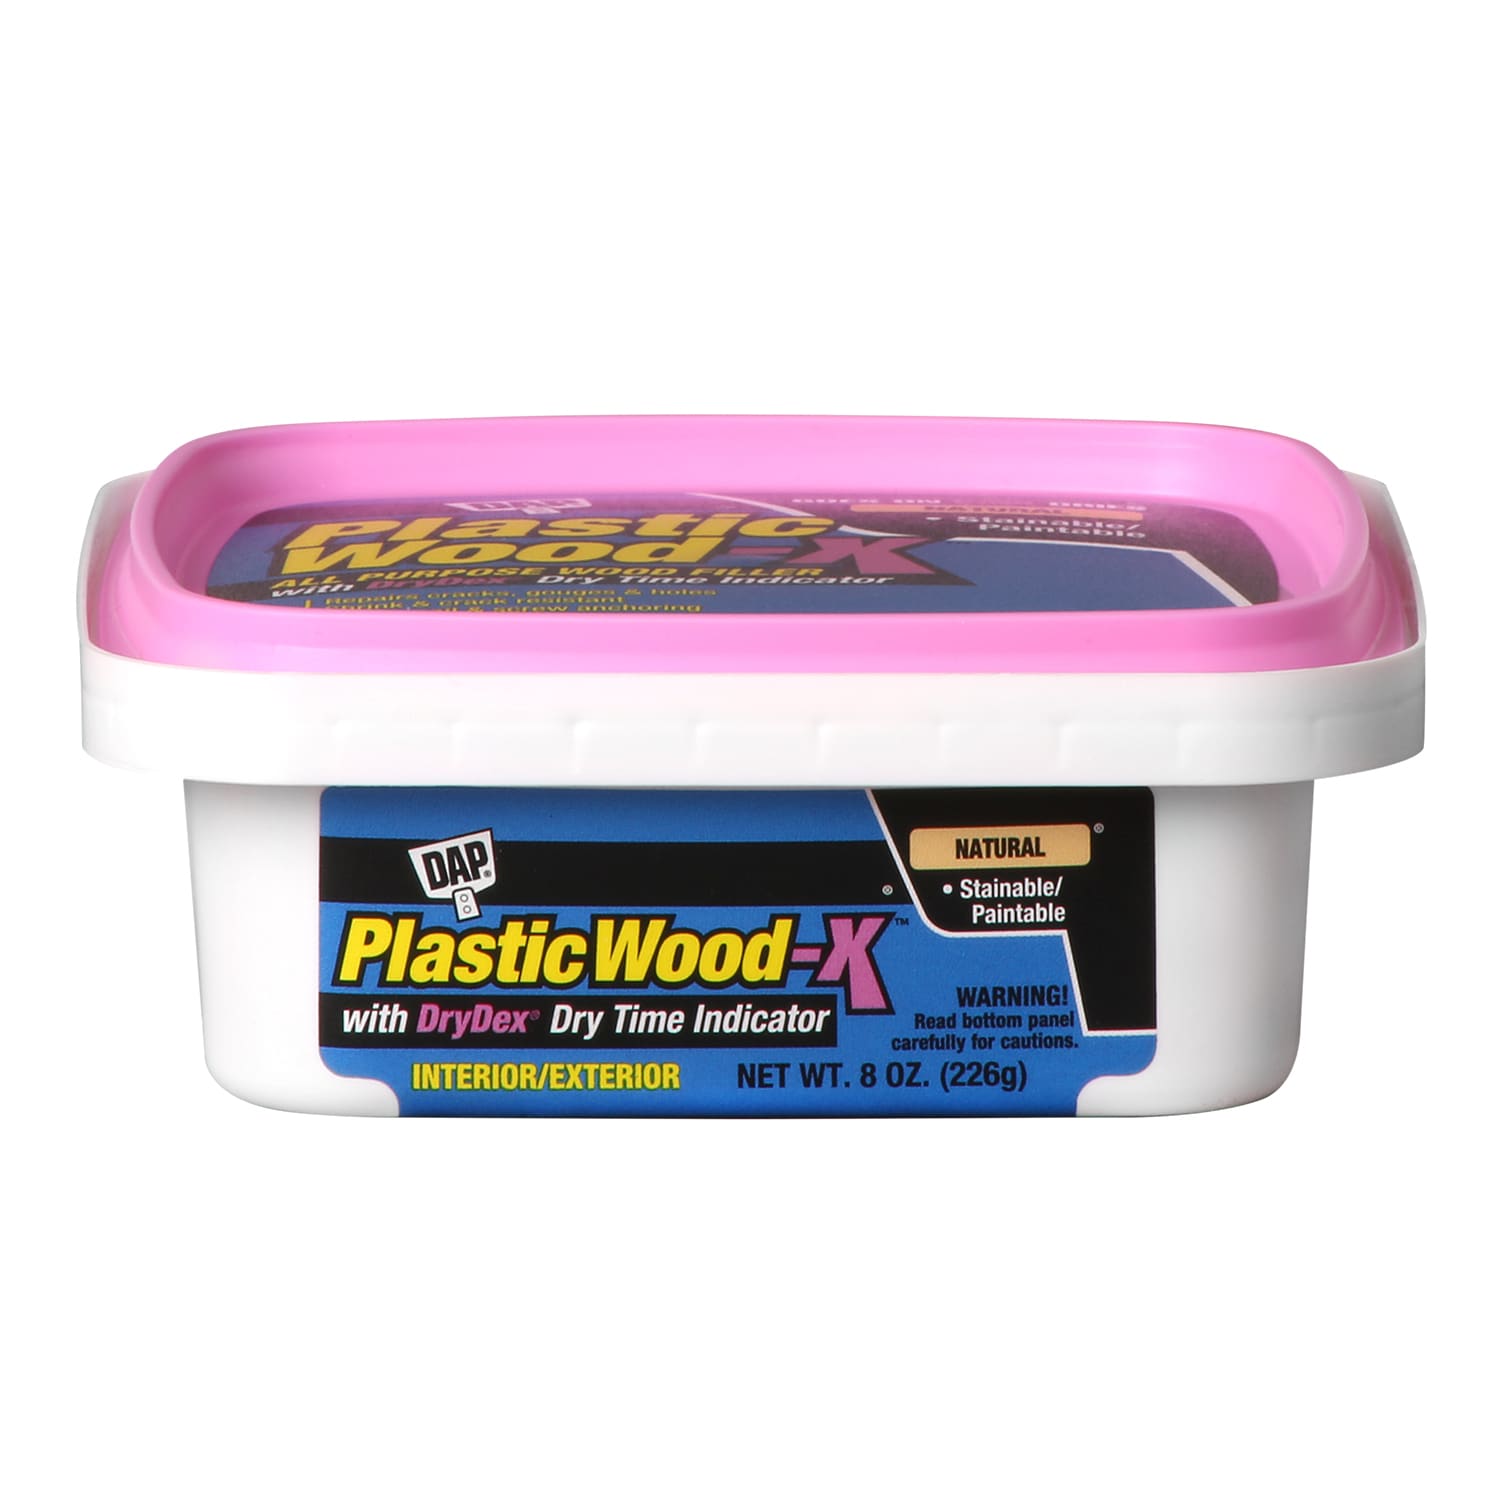 BONCART Wood Filler,Wood Putty,Wood Filler Paintable,Wood Repair Putty Stainable,9.87 Ounce White Wood Filler,Wood Furniture Repair kit,Quickly